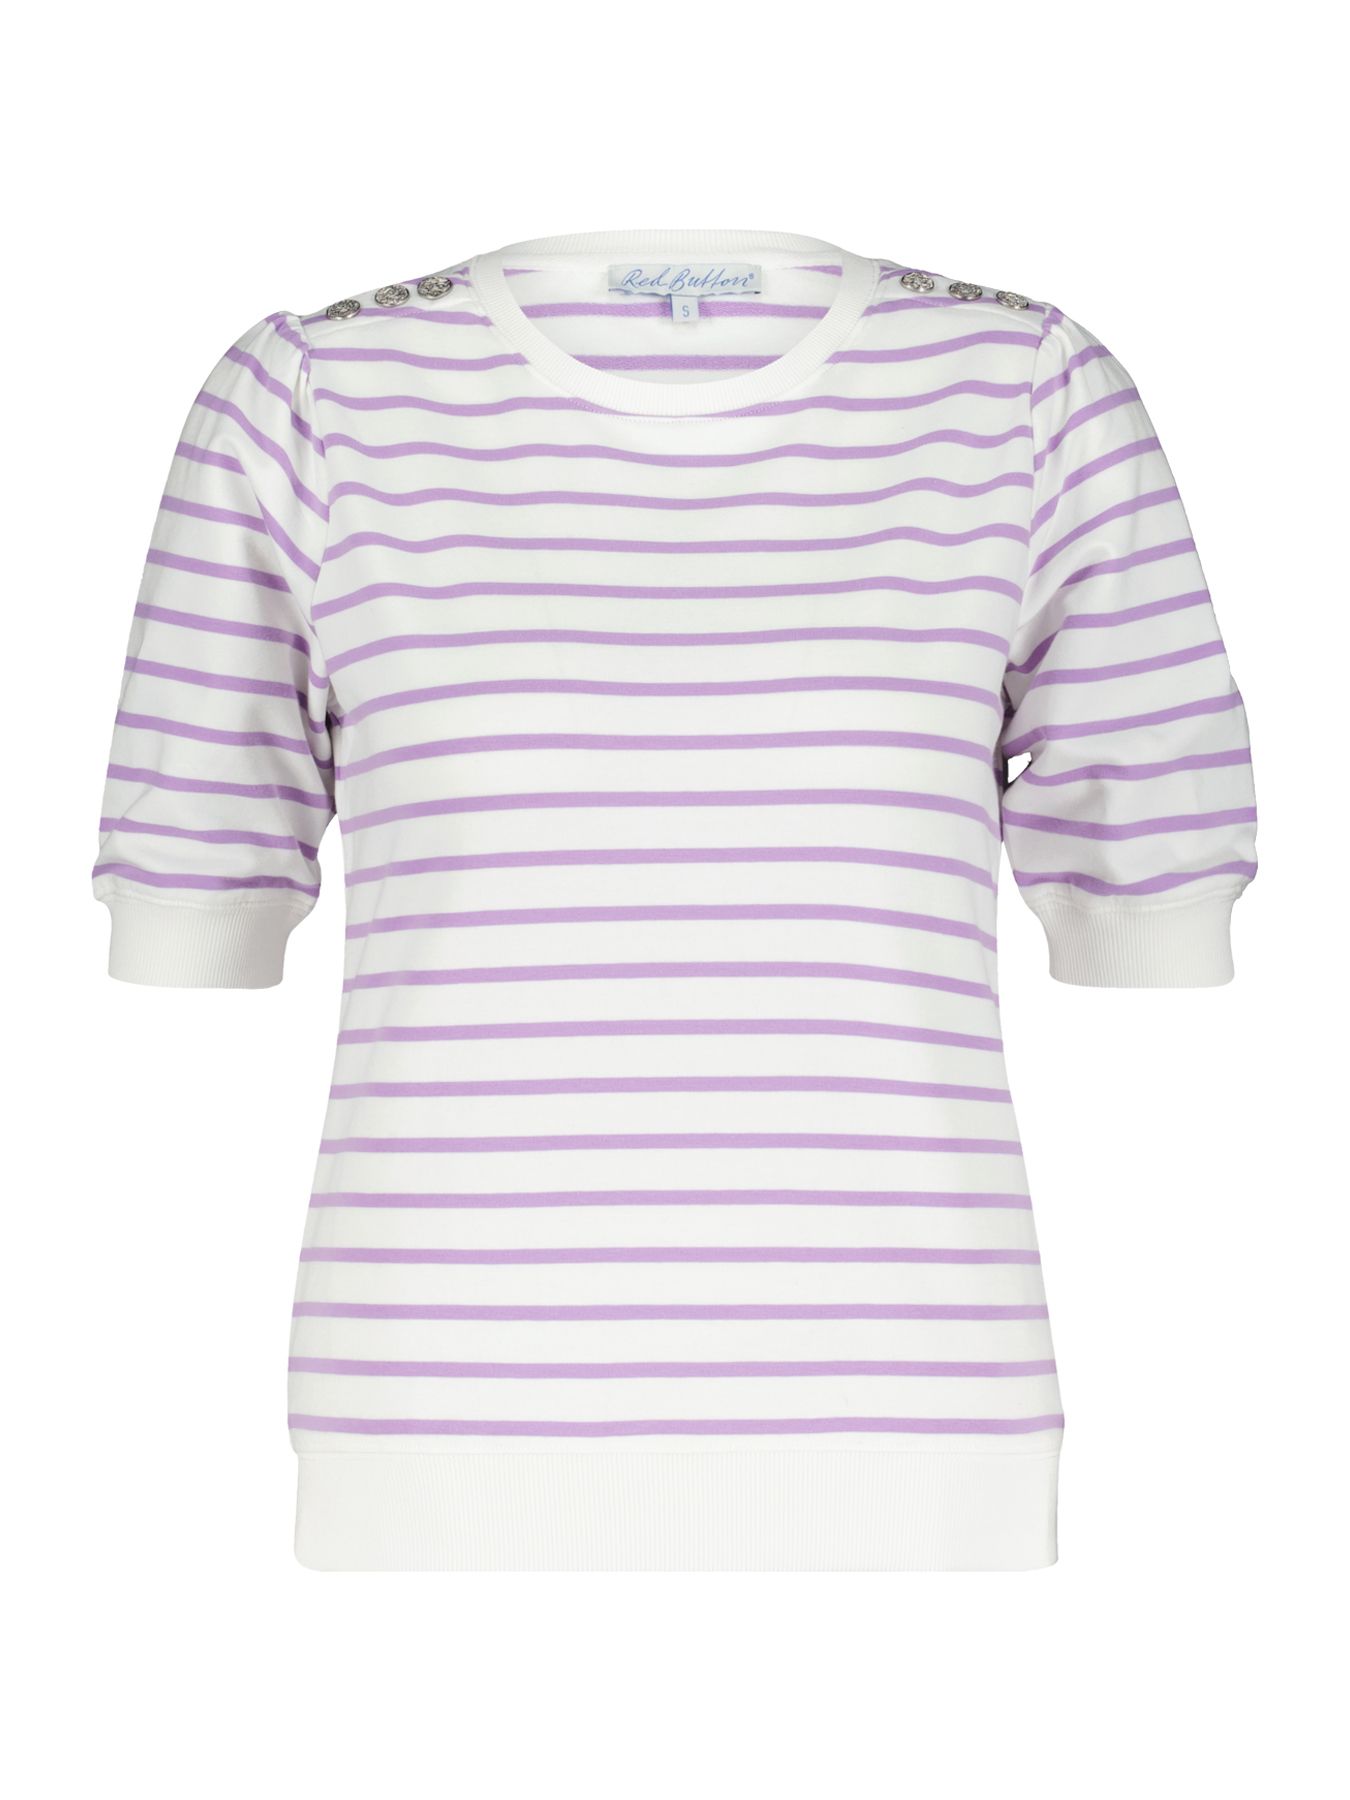 Red Button Terry stripe short sleeve lilac76 2900147171022